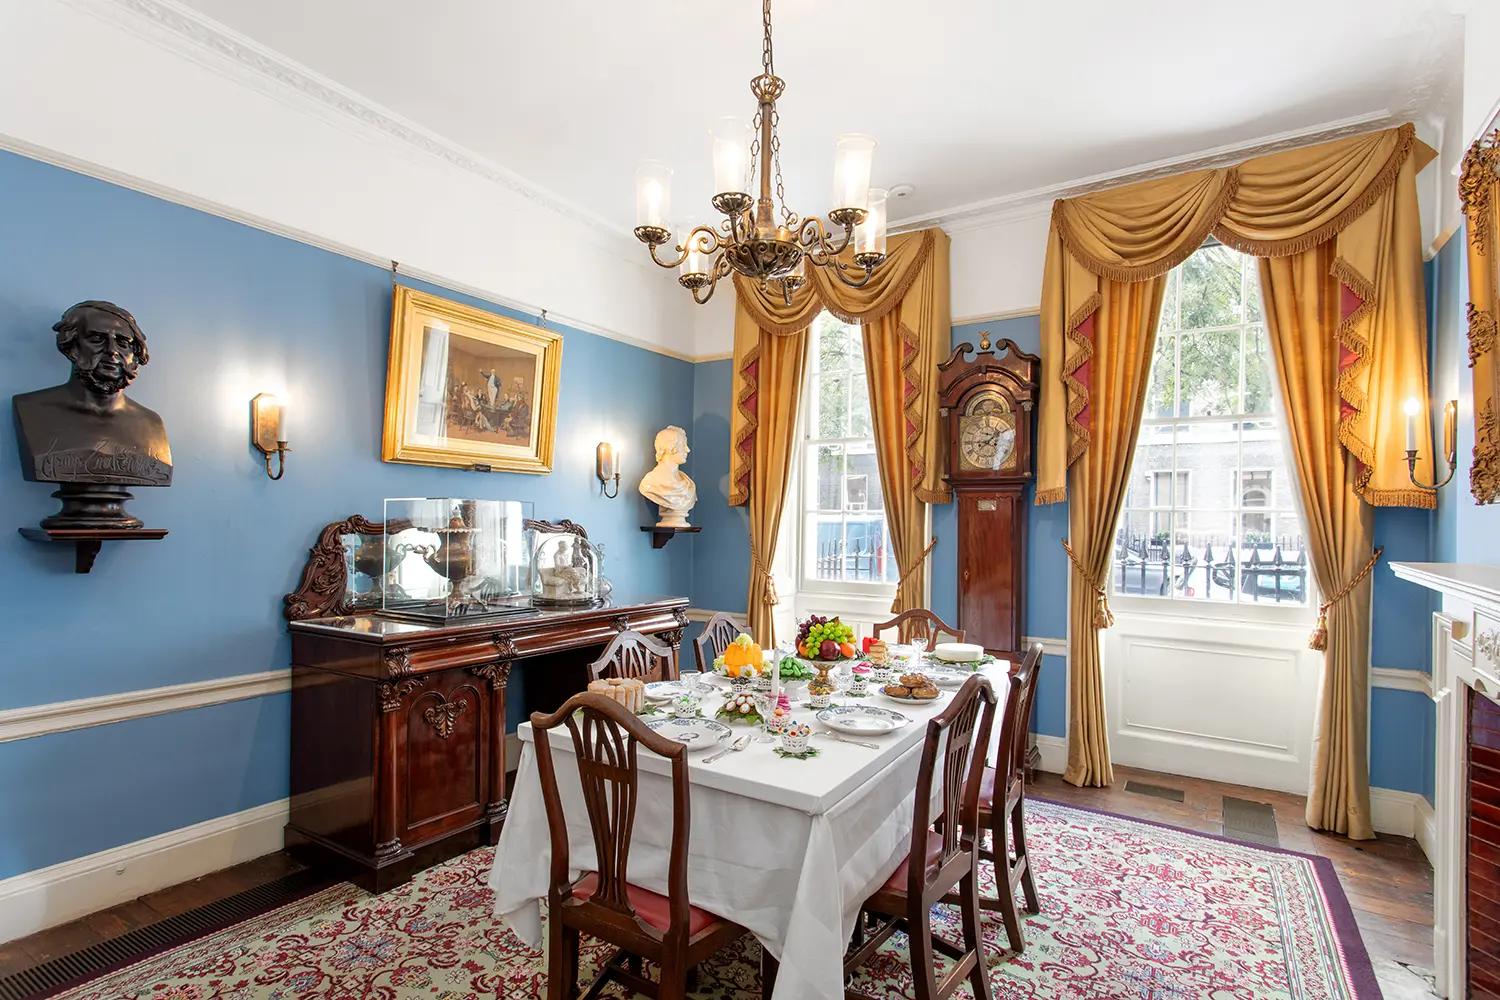 Dinning room at the Charles Dickens Museum in London, UK